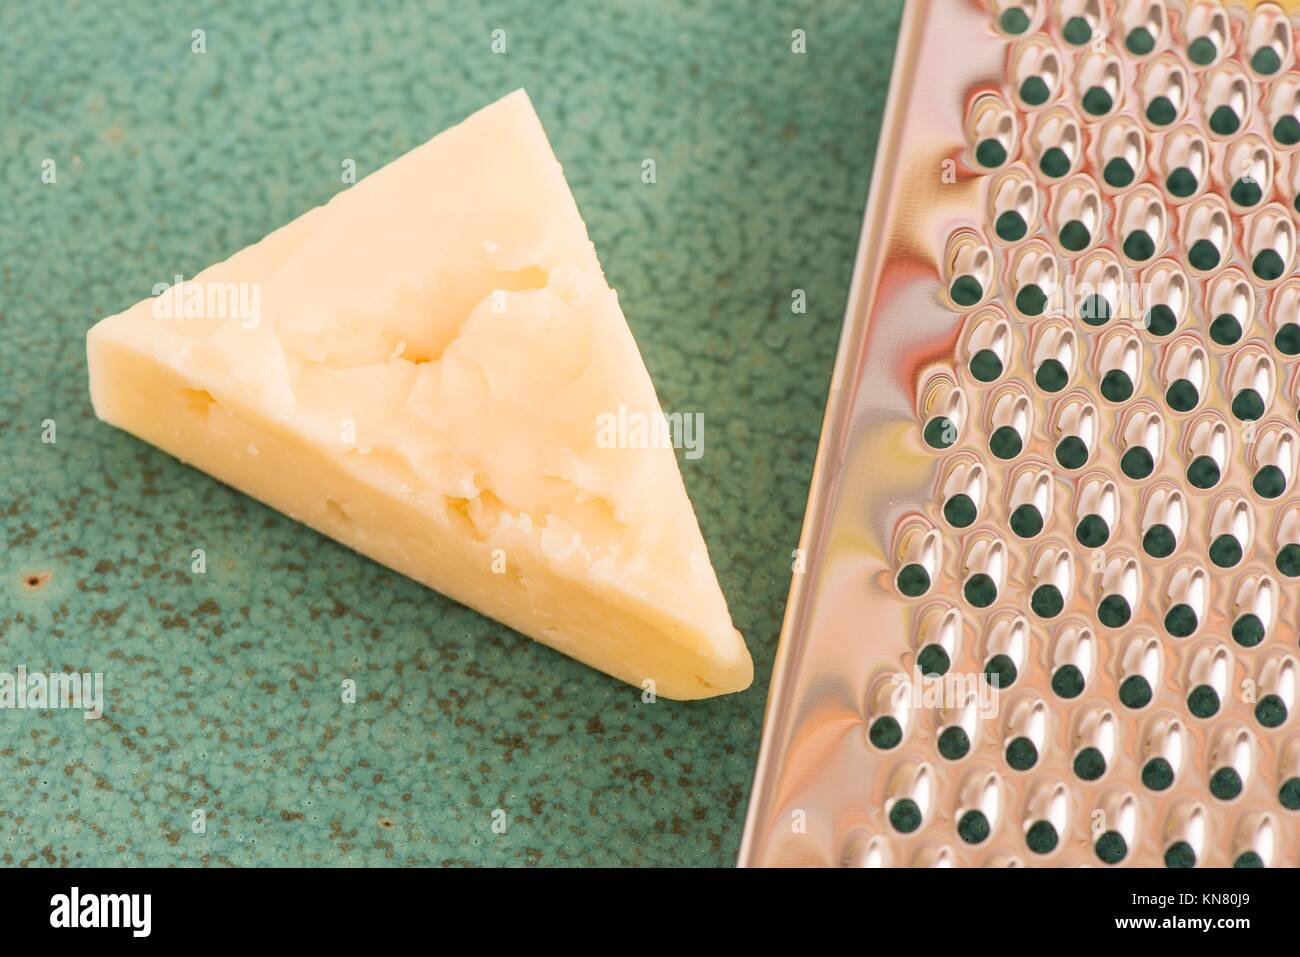 https://c8.alamy.com/comp/KN80J9/cheese-and-stainless-steel-grater-in-close-up-kitchen-appliance-used-KN80J9.jpg